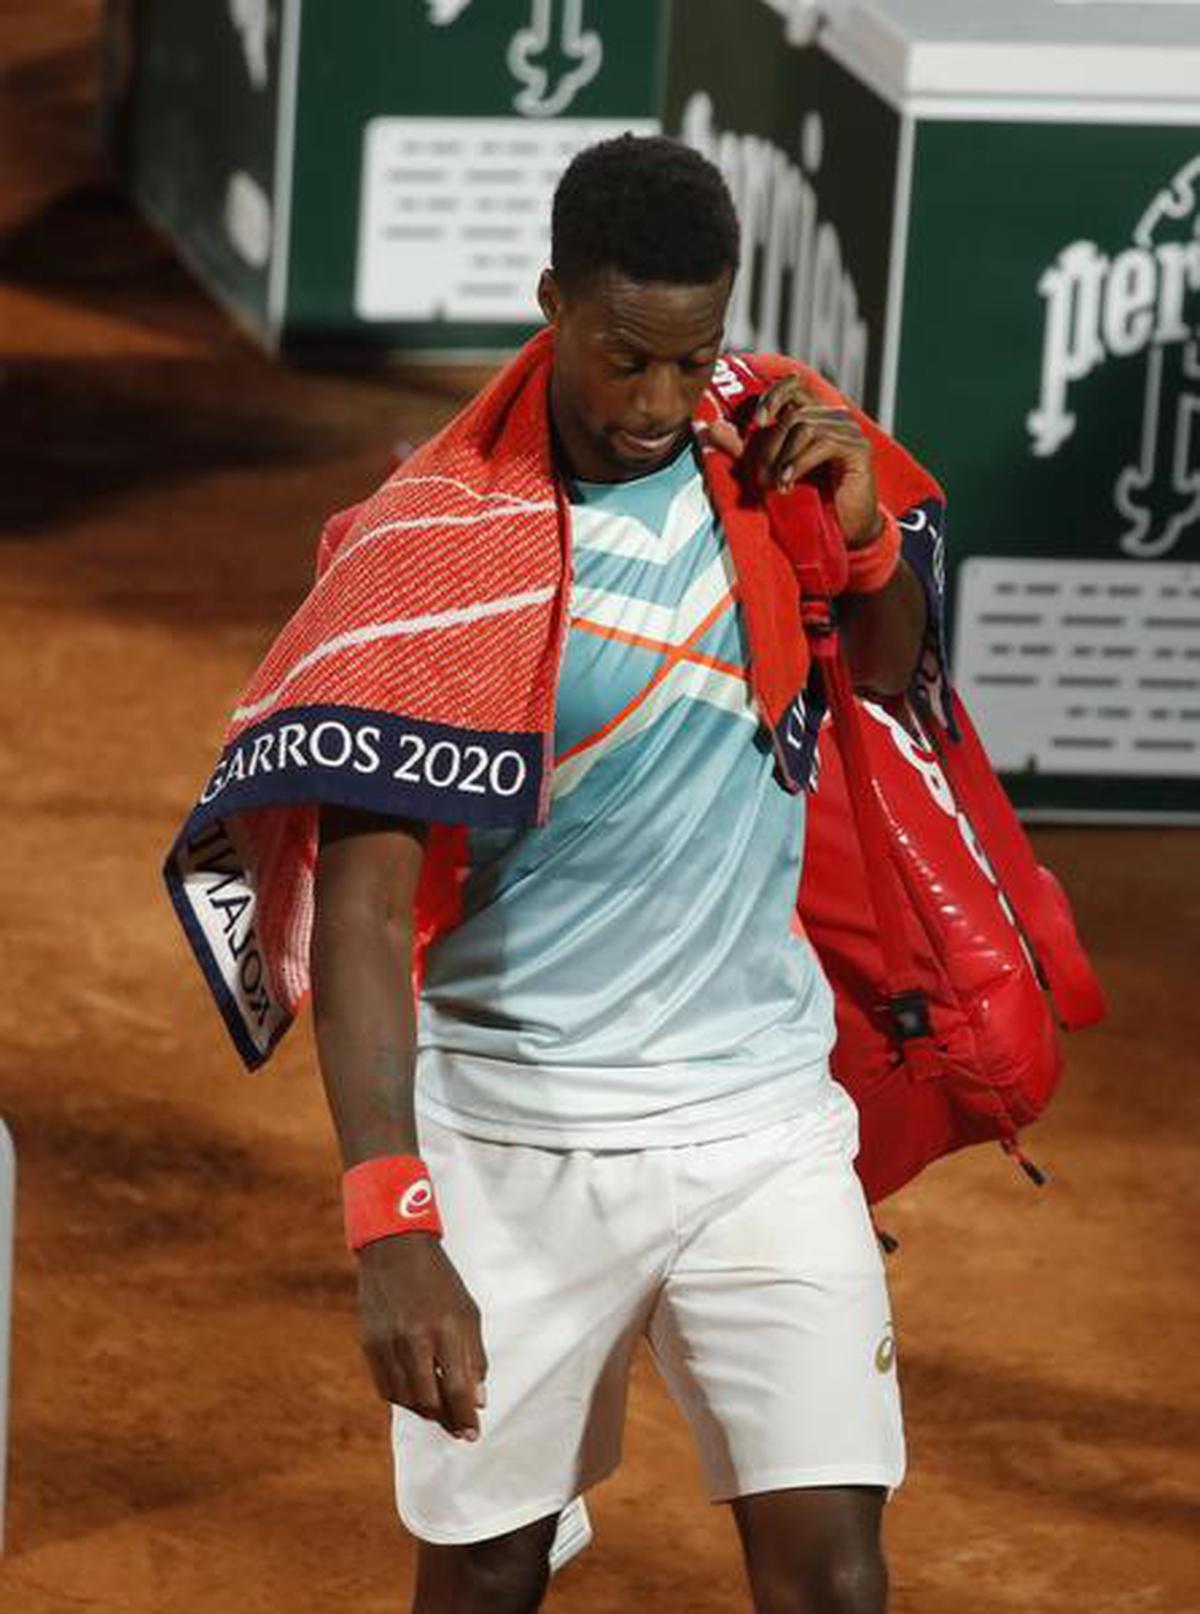 French Open Monfils crashes out in first round, goes down to Alexander Bublik